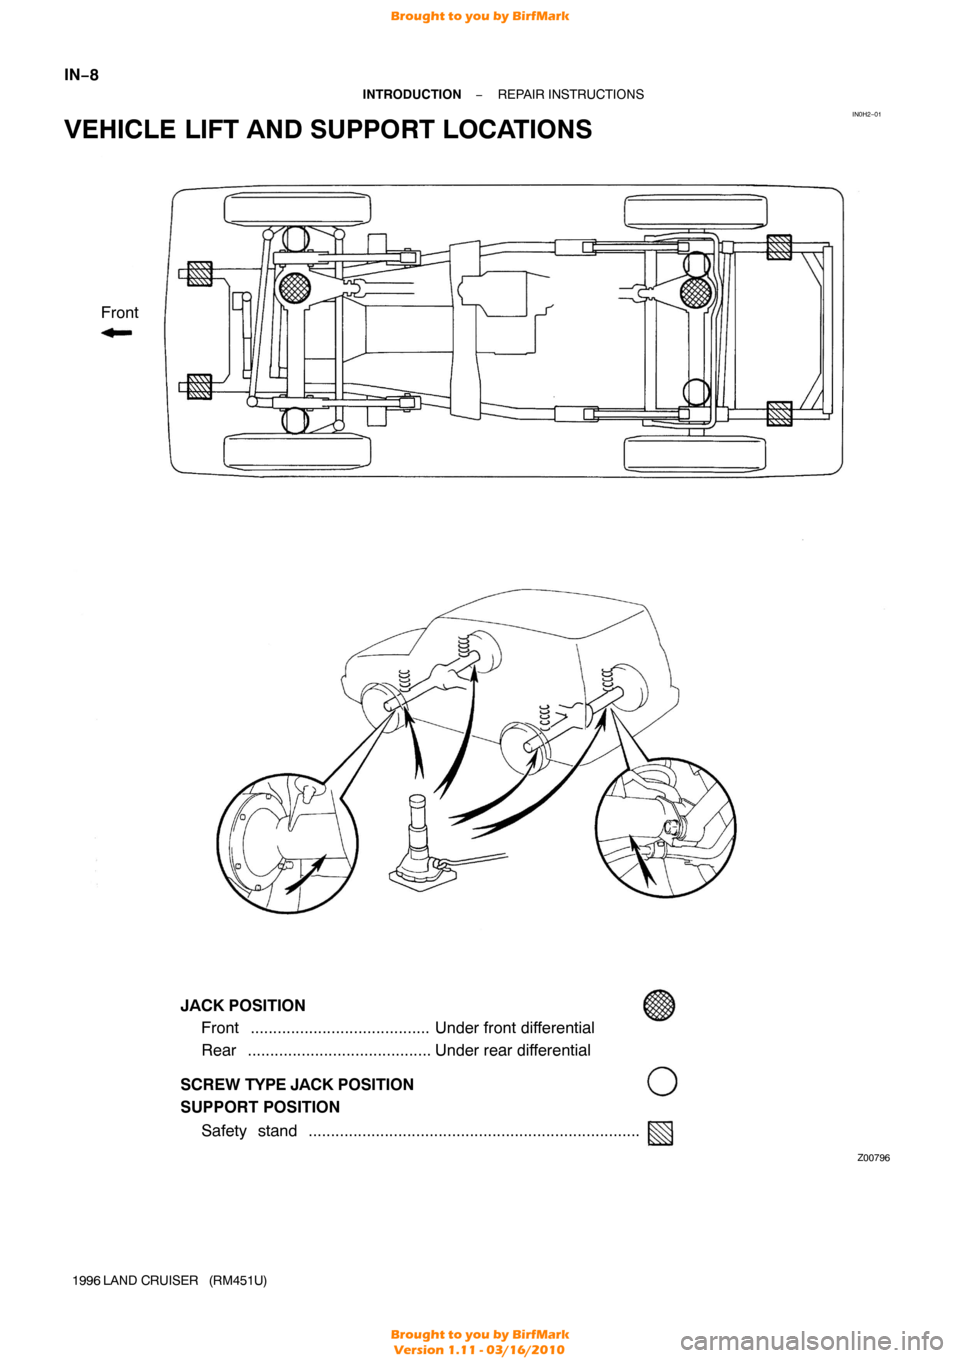 TOYOTA LAND CRUISER 1996 J80 Workshop Manual IN0H2−01
Z00796
SUPPORT POSITIONRear  ......................................... Under rear differential
Safety stand ...........................................................\
...............
JACK